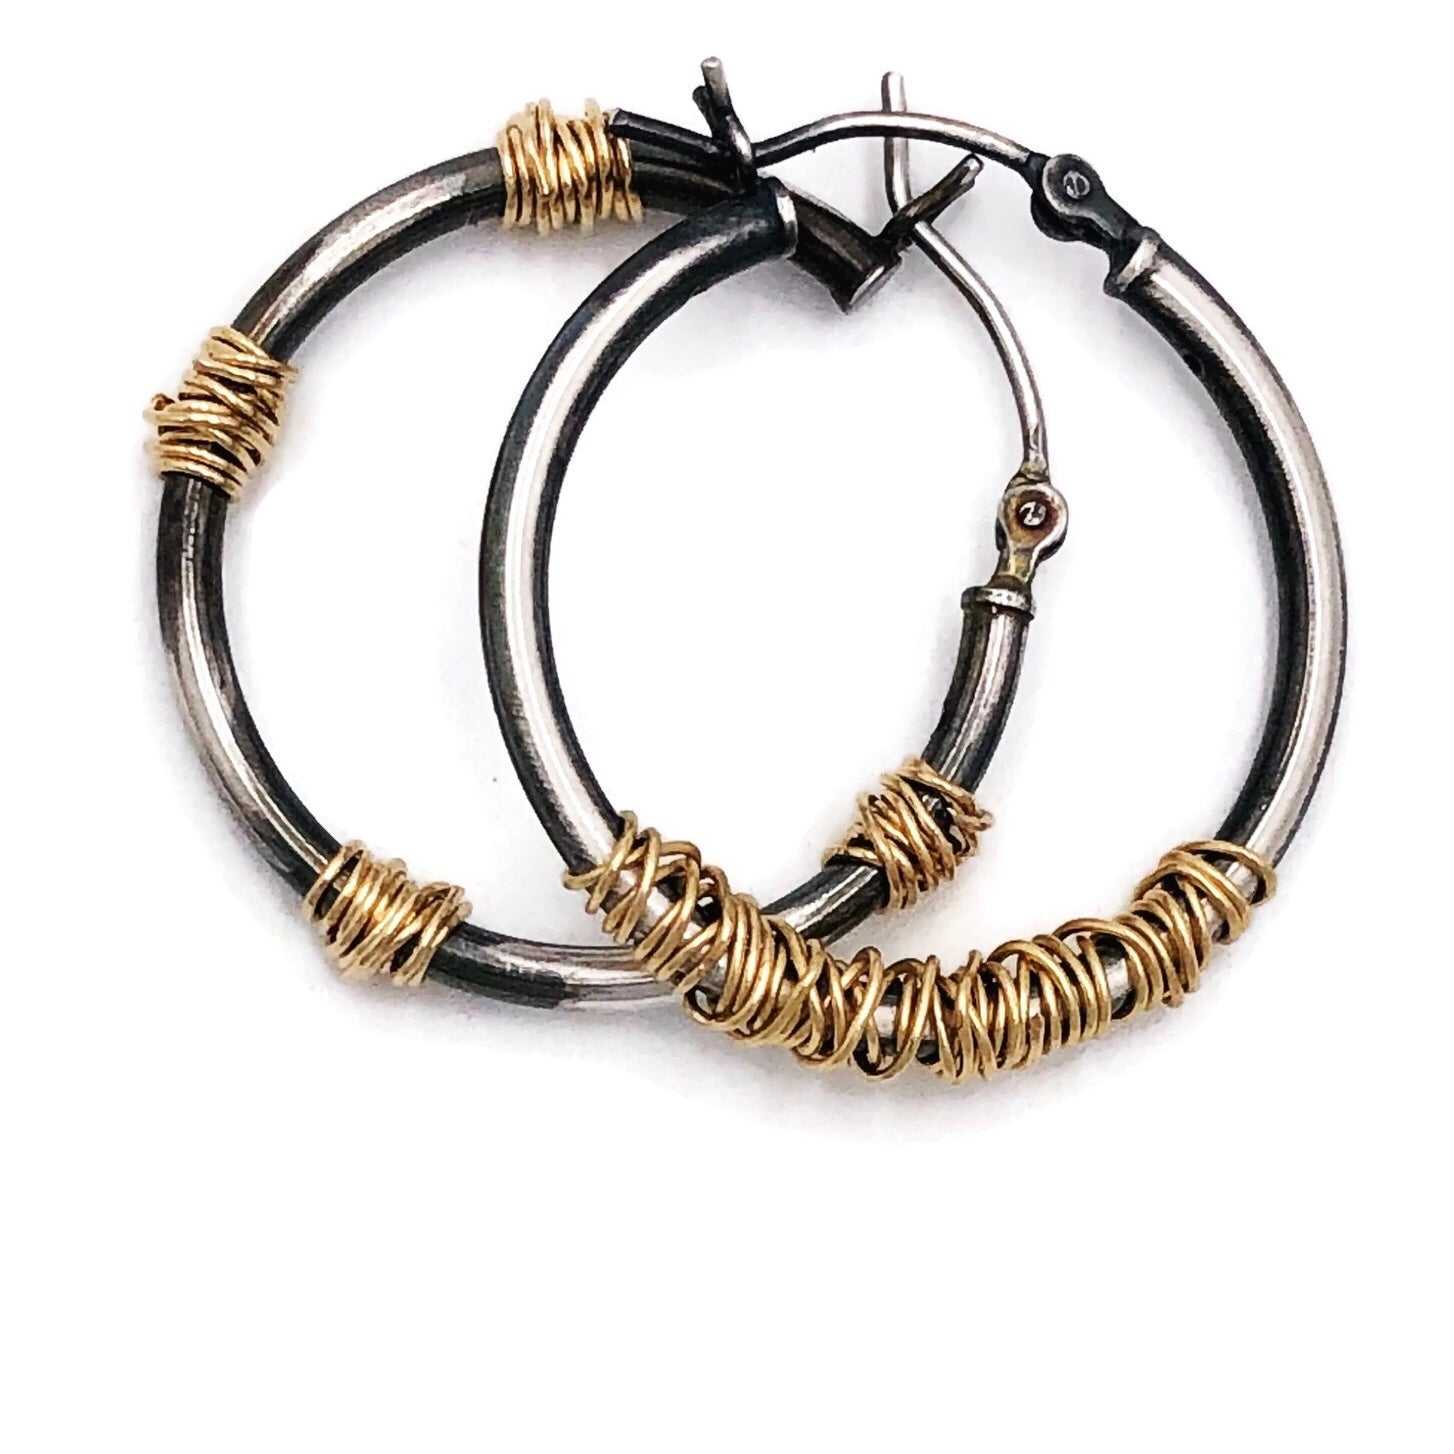 Gold and Silver Hoops mis-matched